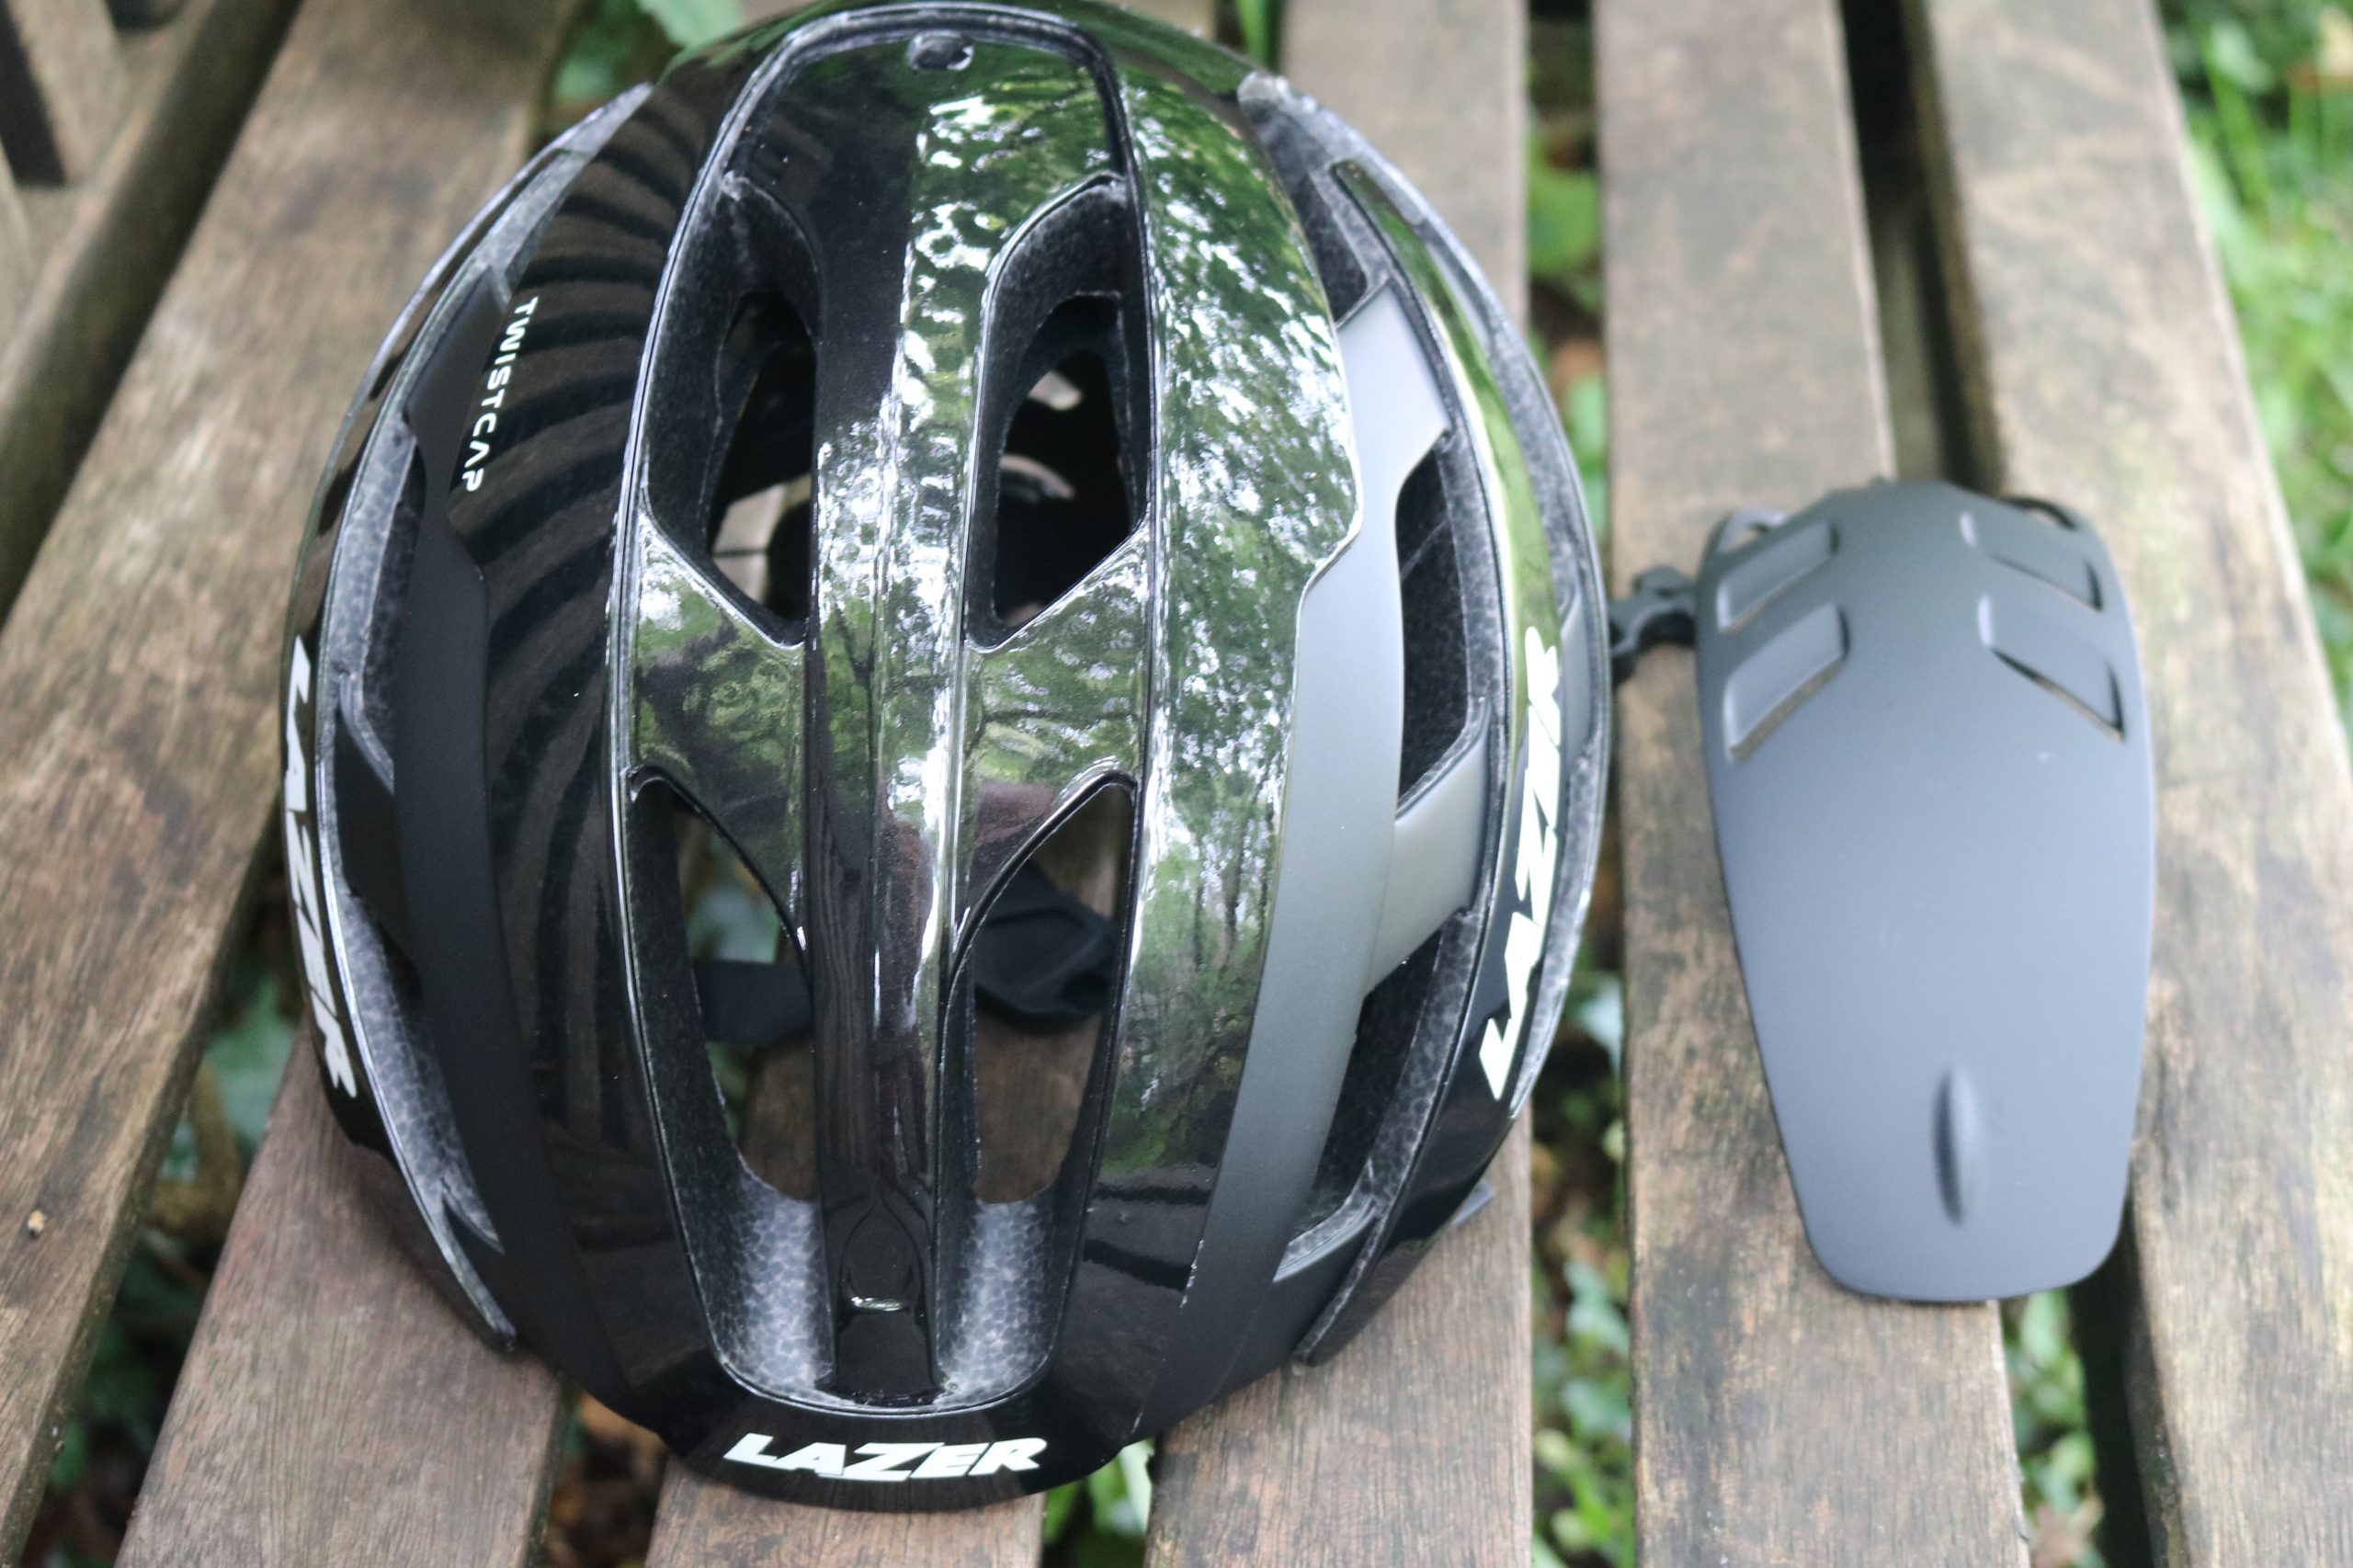 Lazer Century MIPS helmet review | Cycling Weekly